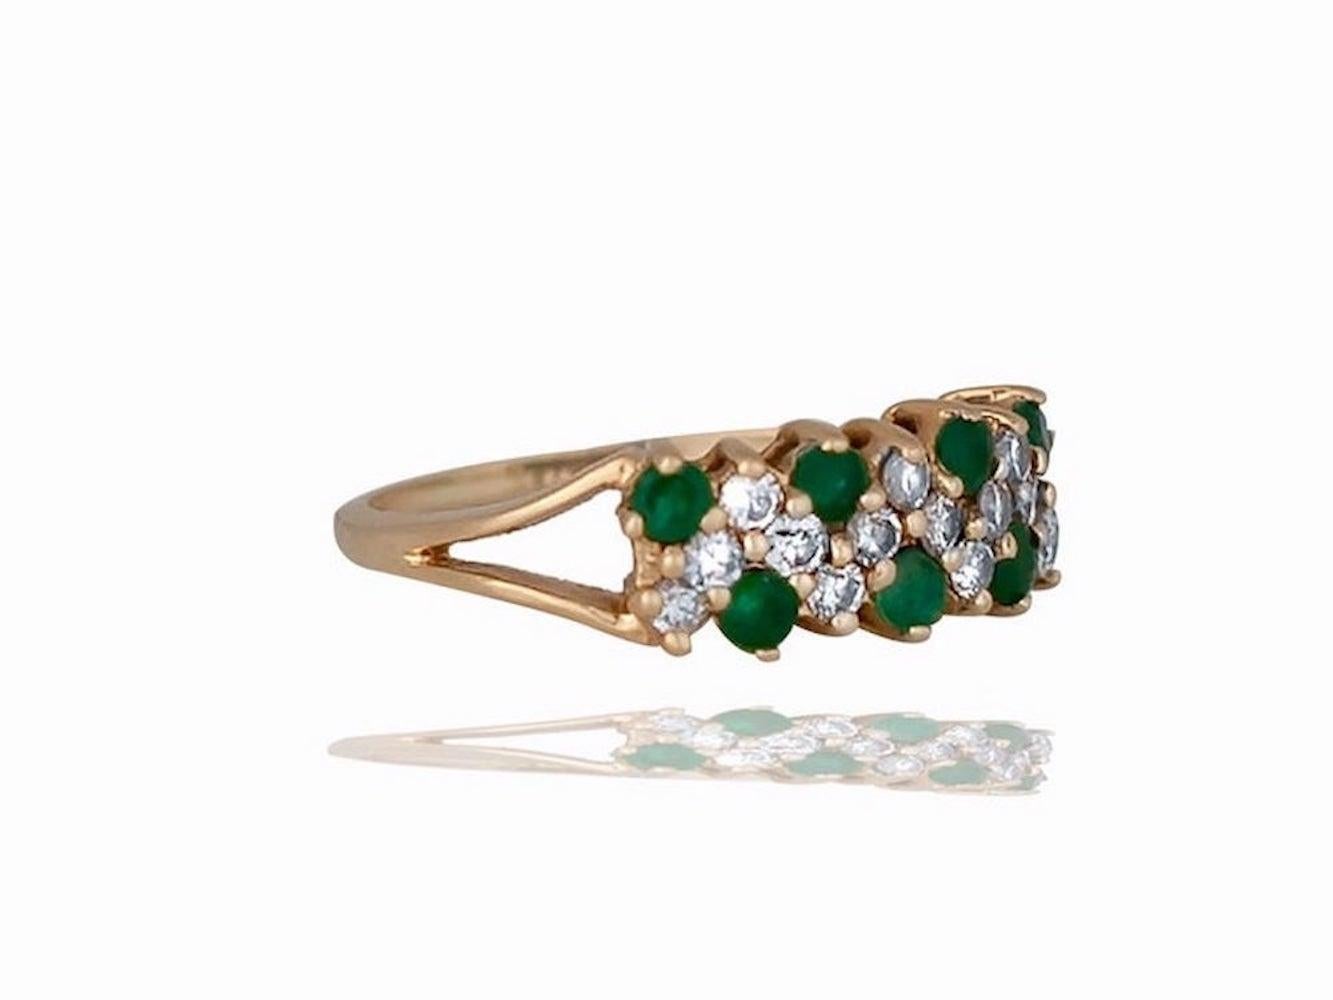 Jewel Green Colored Emeralds and diamonds are set in this ring containing 1.00 carat total weight. 
This ring has seven round brilliant emeralds that are prong set and thirteen round brilliant diamonds that measure between 2.5 -2.0 mm 

The round